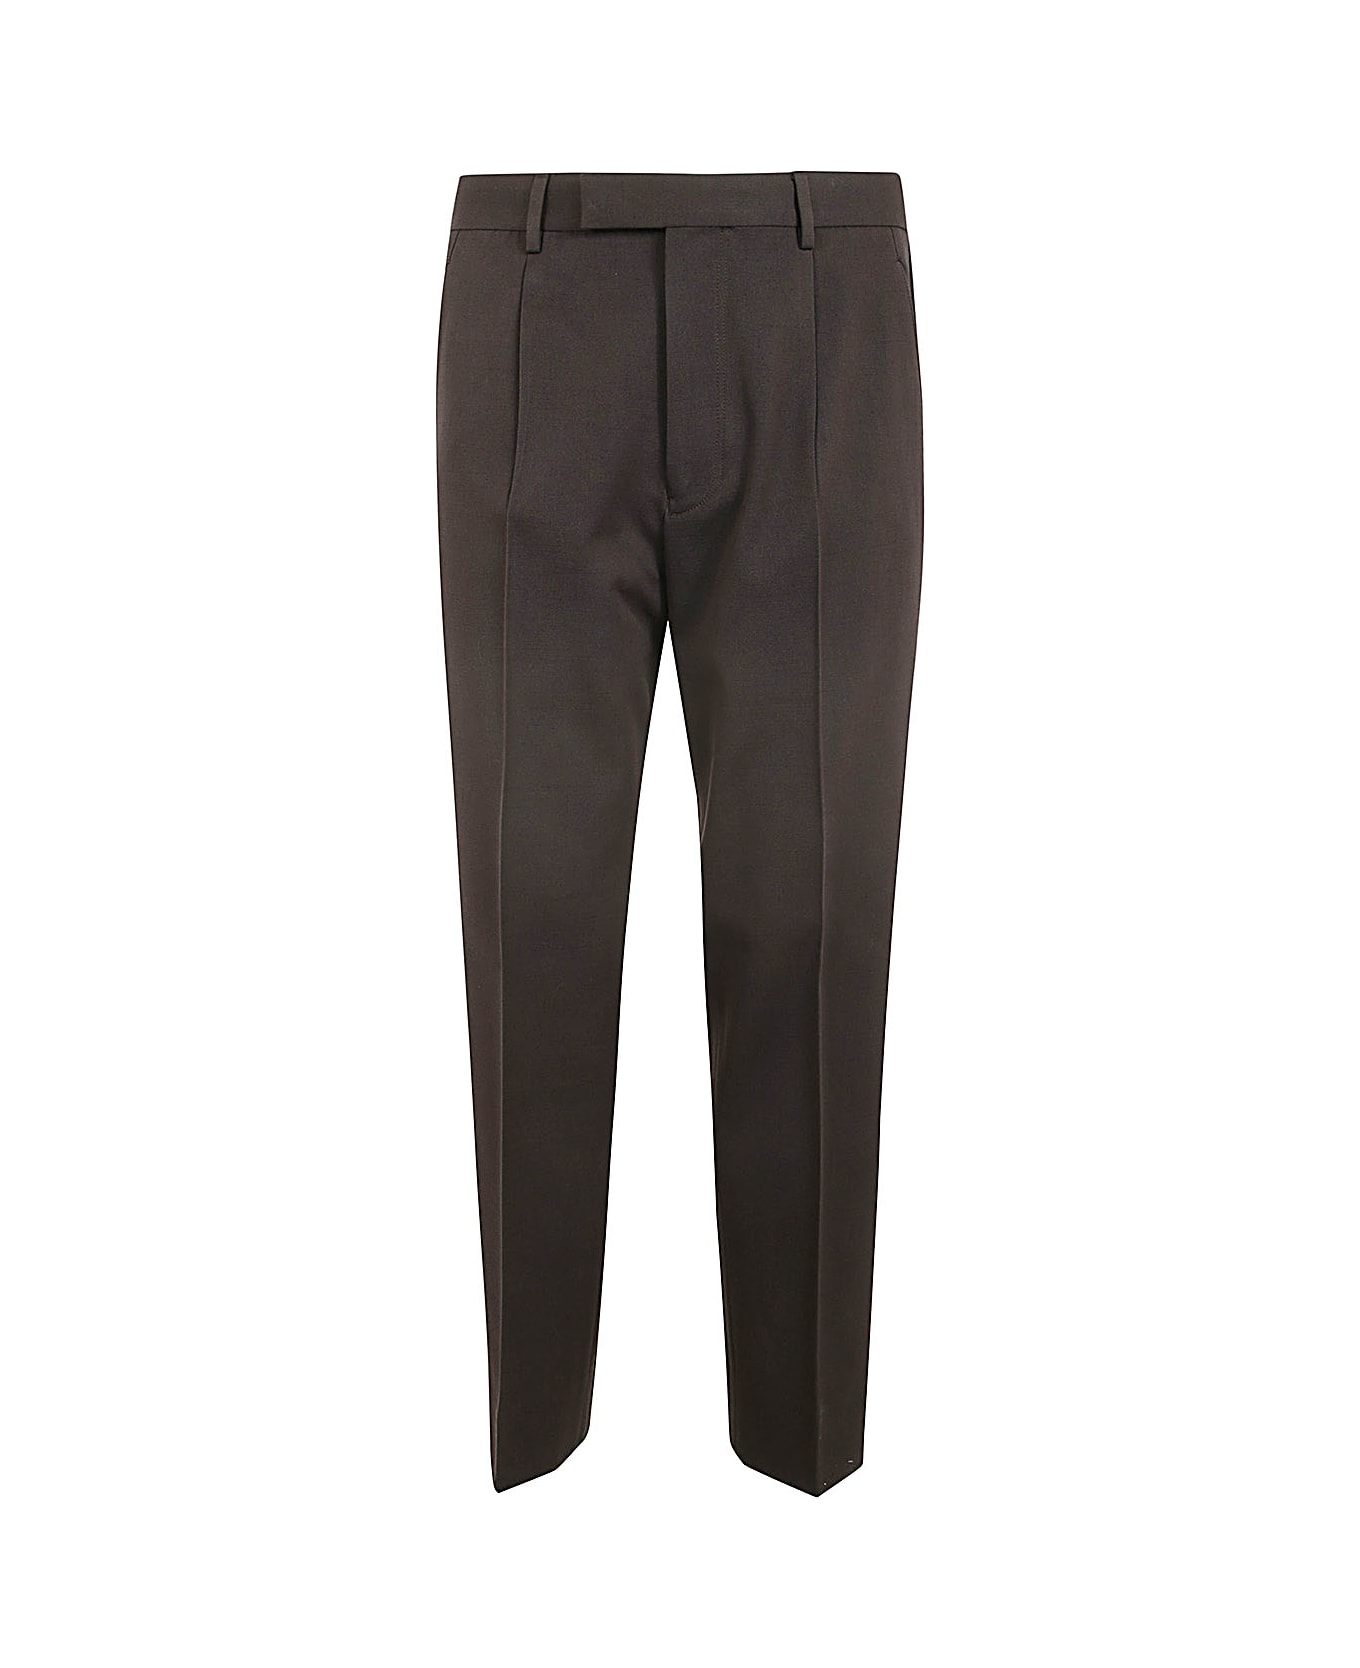 Zegna Cotton And Wool Pants - Brown